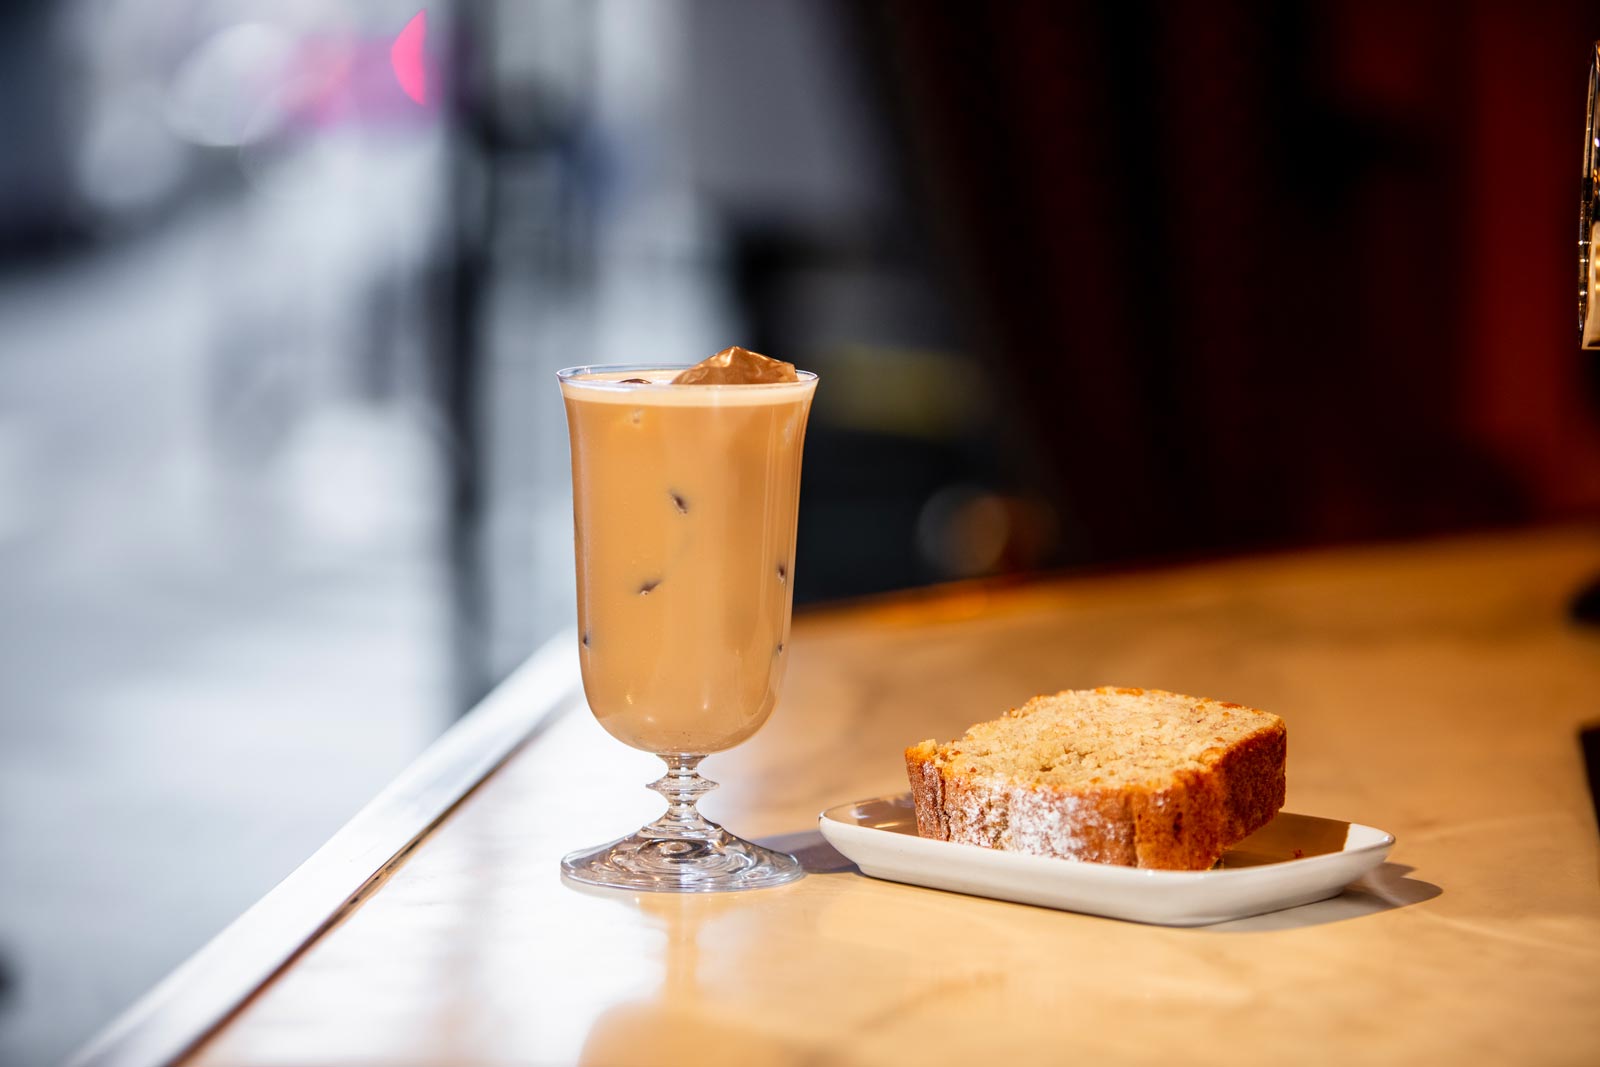 On the surface of a bar there is a slice of banana cake on a small white plate, next to it there is a glass of iced coffee in a tall glass.